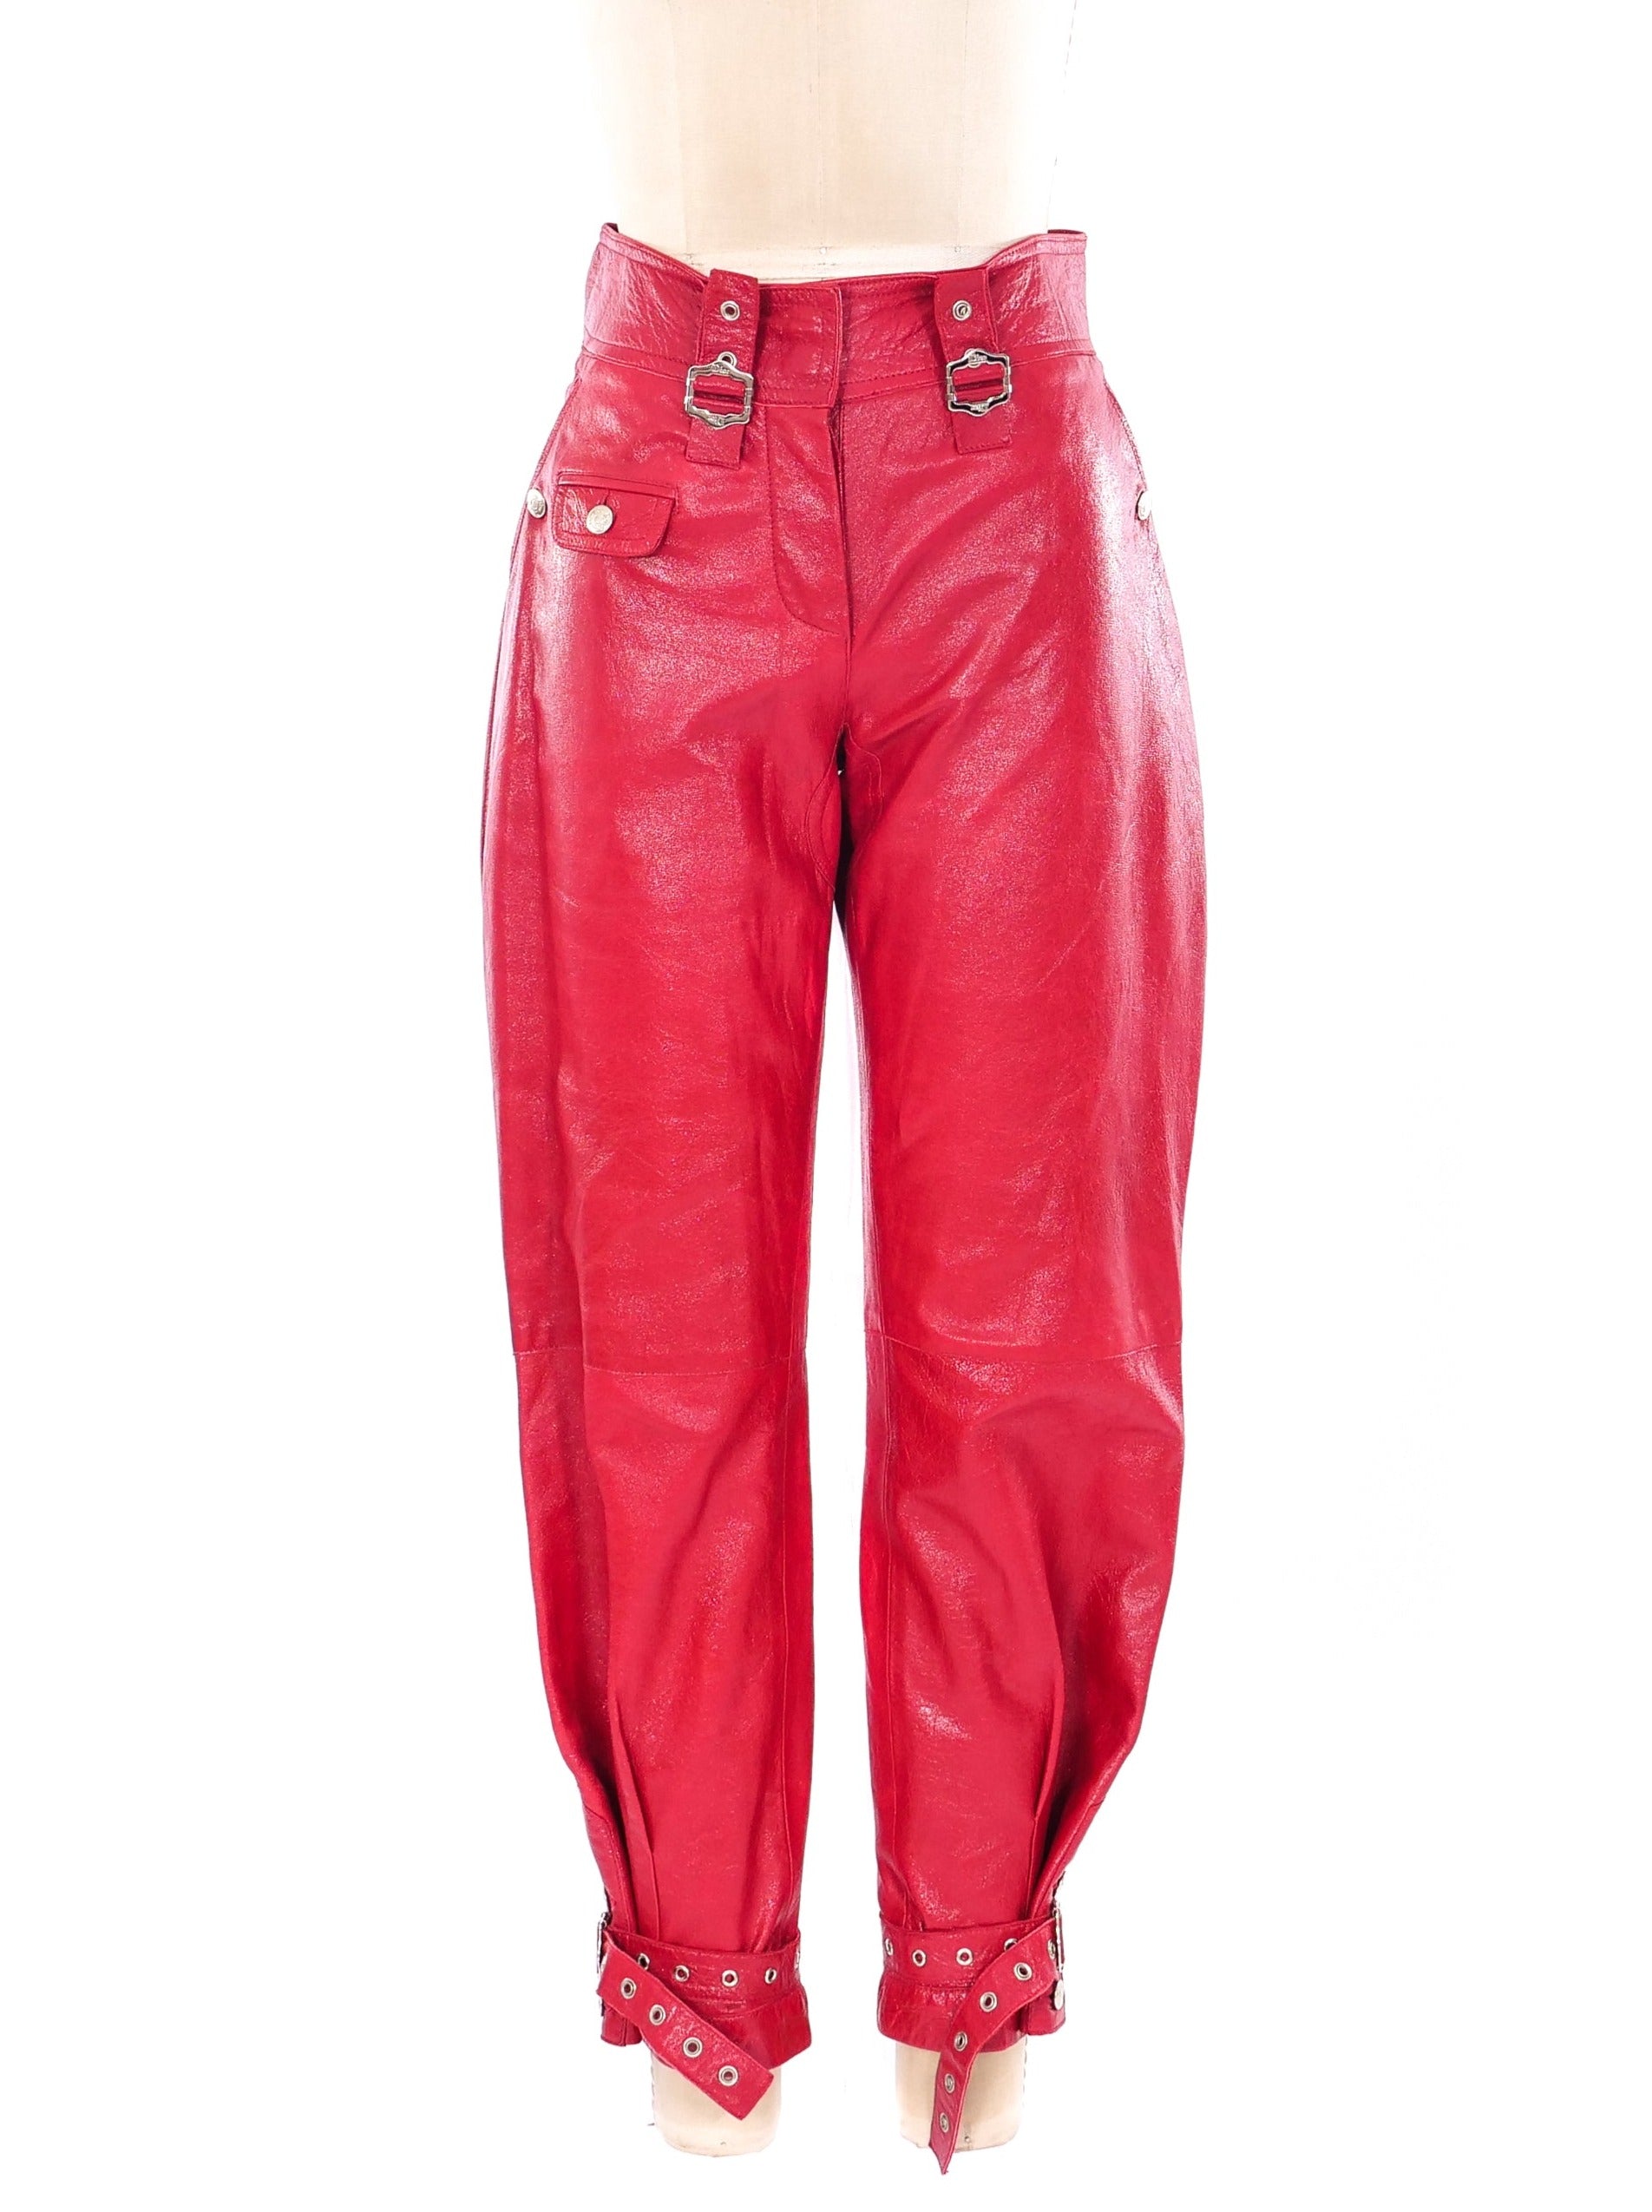 【archive】90s Christian Dior leatherpants